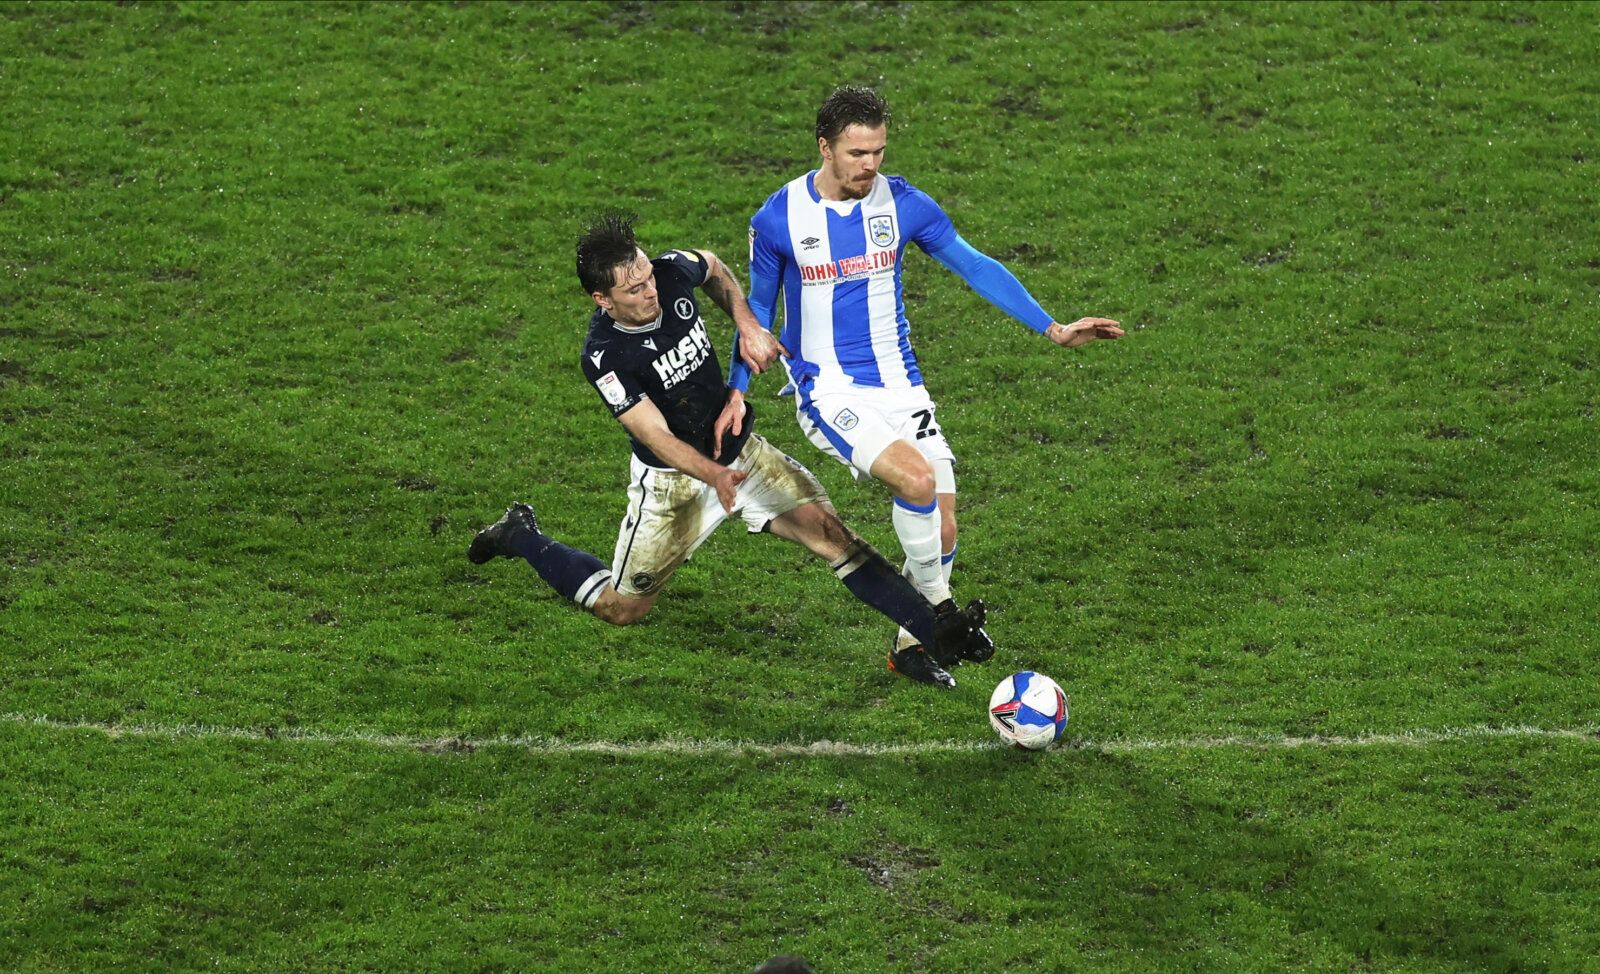 Soccer Football - Championship - Huddersfield Town v Millwall - John Smith's Stadium, Huddersfield, Britain - January 20, 2021  Huddersfield Town's Daniel Ward in action with Millwall's Ben Thompson Action Images/Lee Smith EDITORIAL USE ONLY. No use with unauthorized audio, video, data, fixture lists, club/league logos or 'live' services. Online in-match use limited to 75 images, no video emulation. No use in betting, games or single club /league/player publications.  Please contact your account